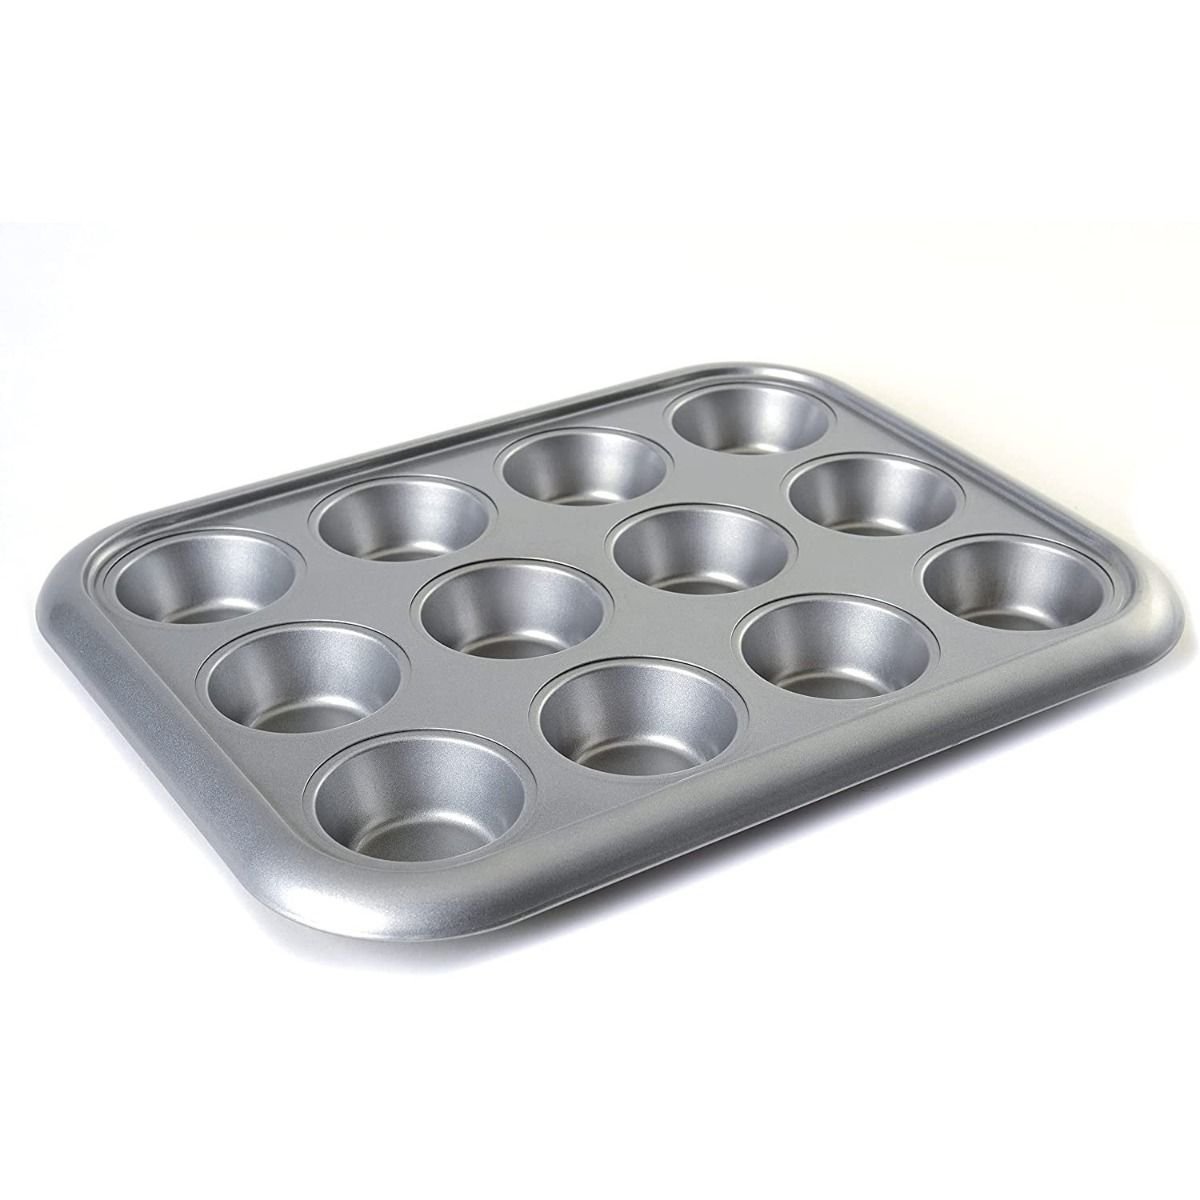 OXO Good Grips Nonstick Pro 12-Cup Muffin Pan 